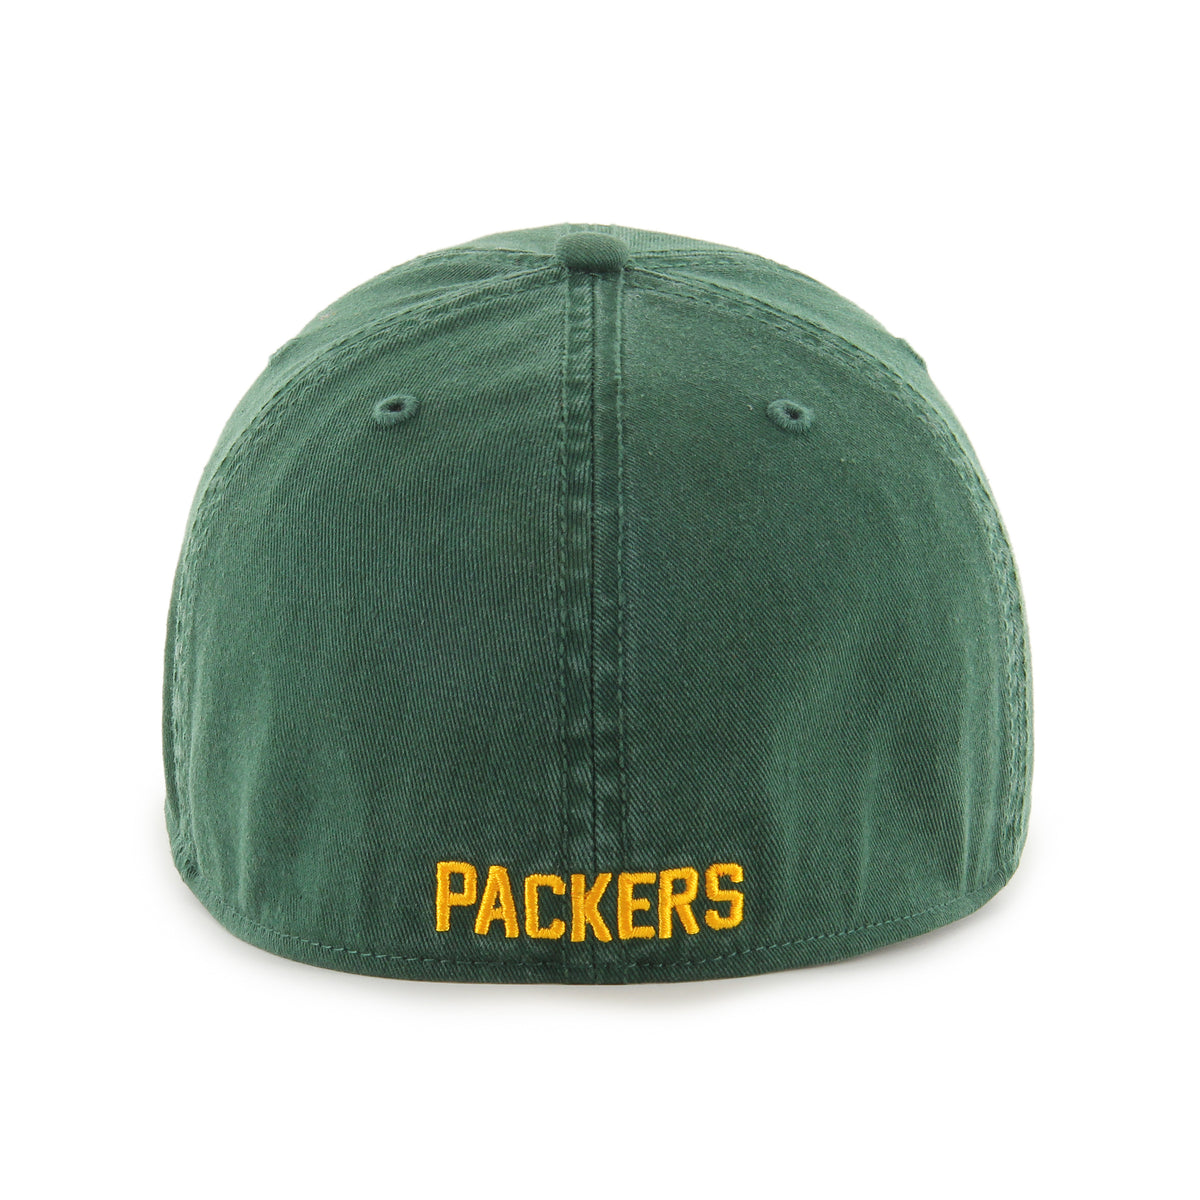 GREEN BAY PACKERS HISTORIC CLASSIC '47 FRANCHISE